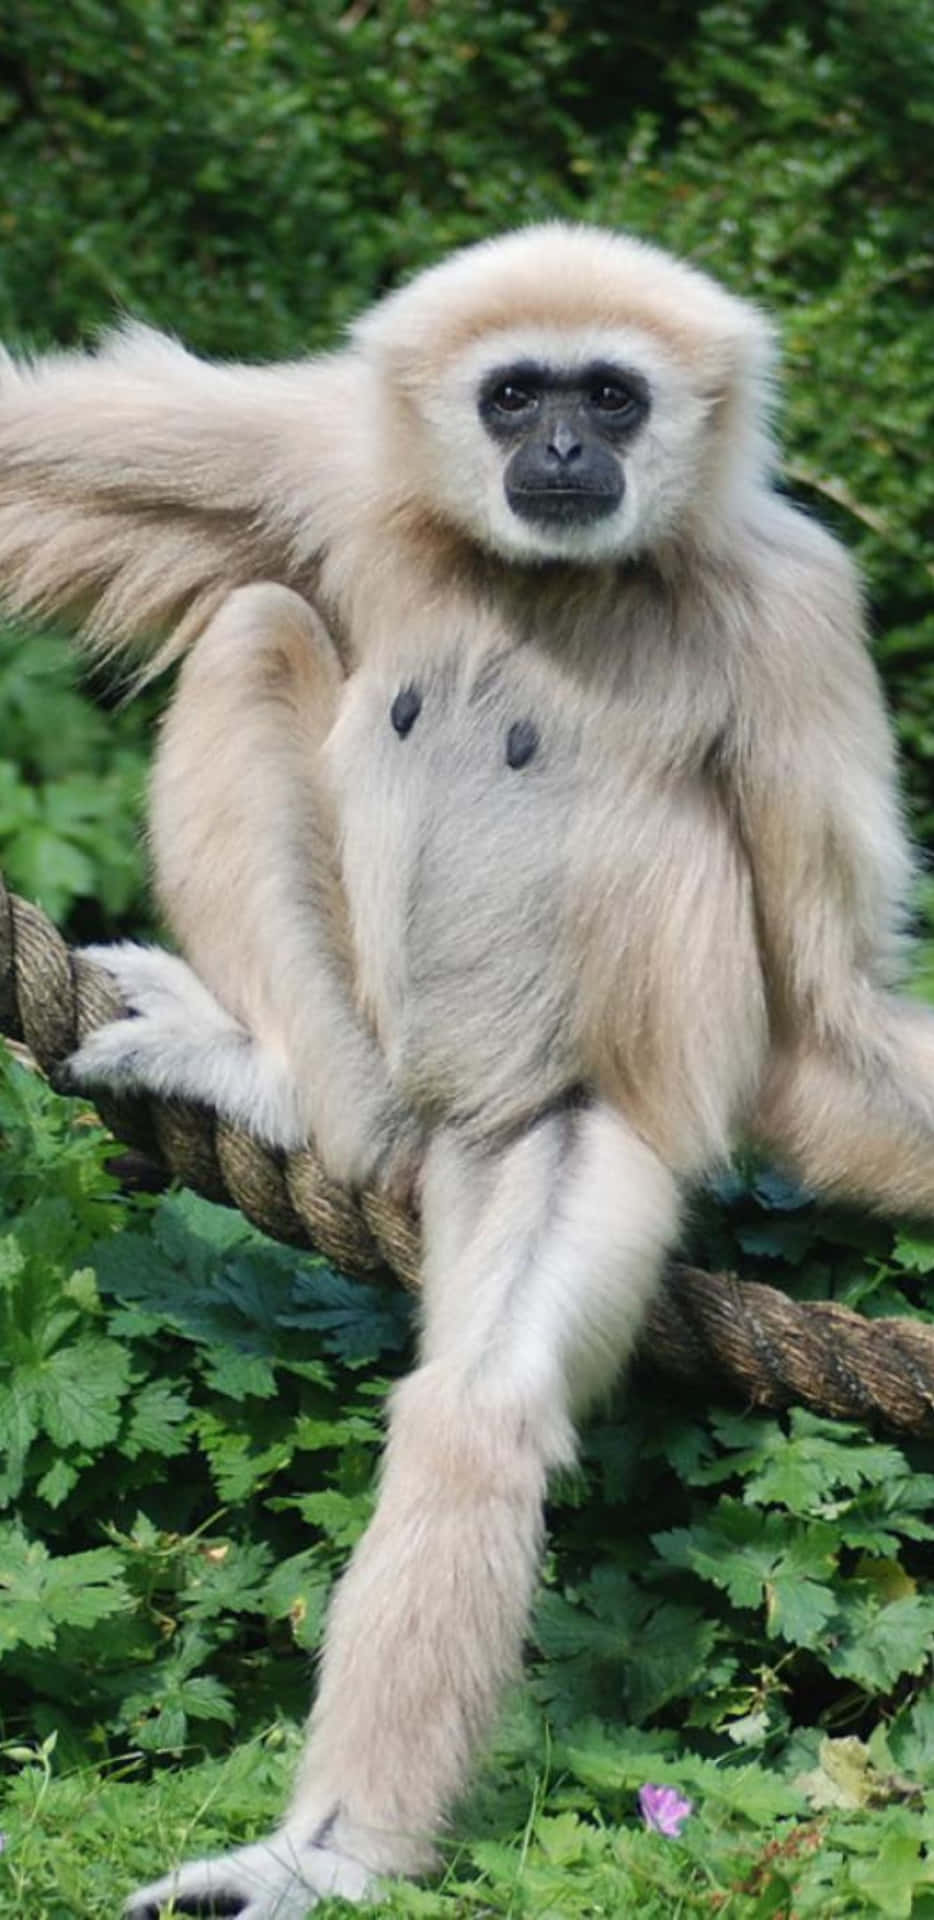 Enjoy your Day with Pixel 3xl Gibbon